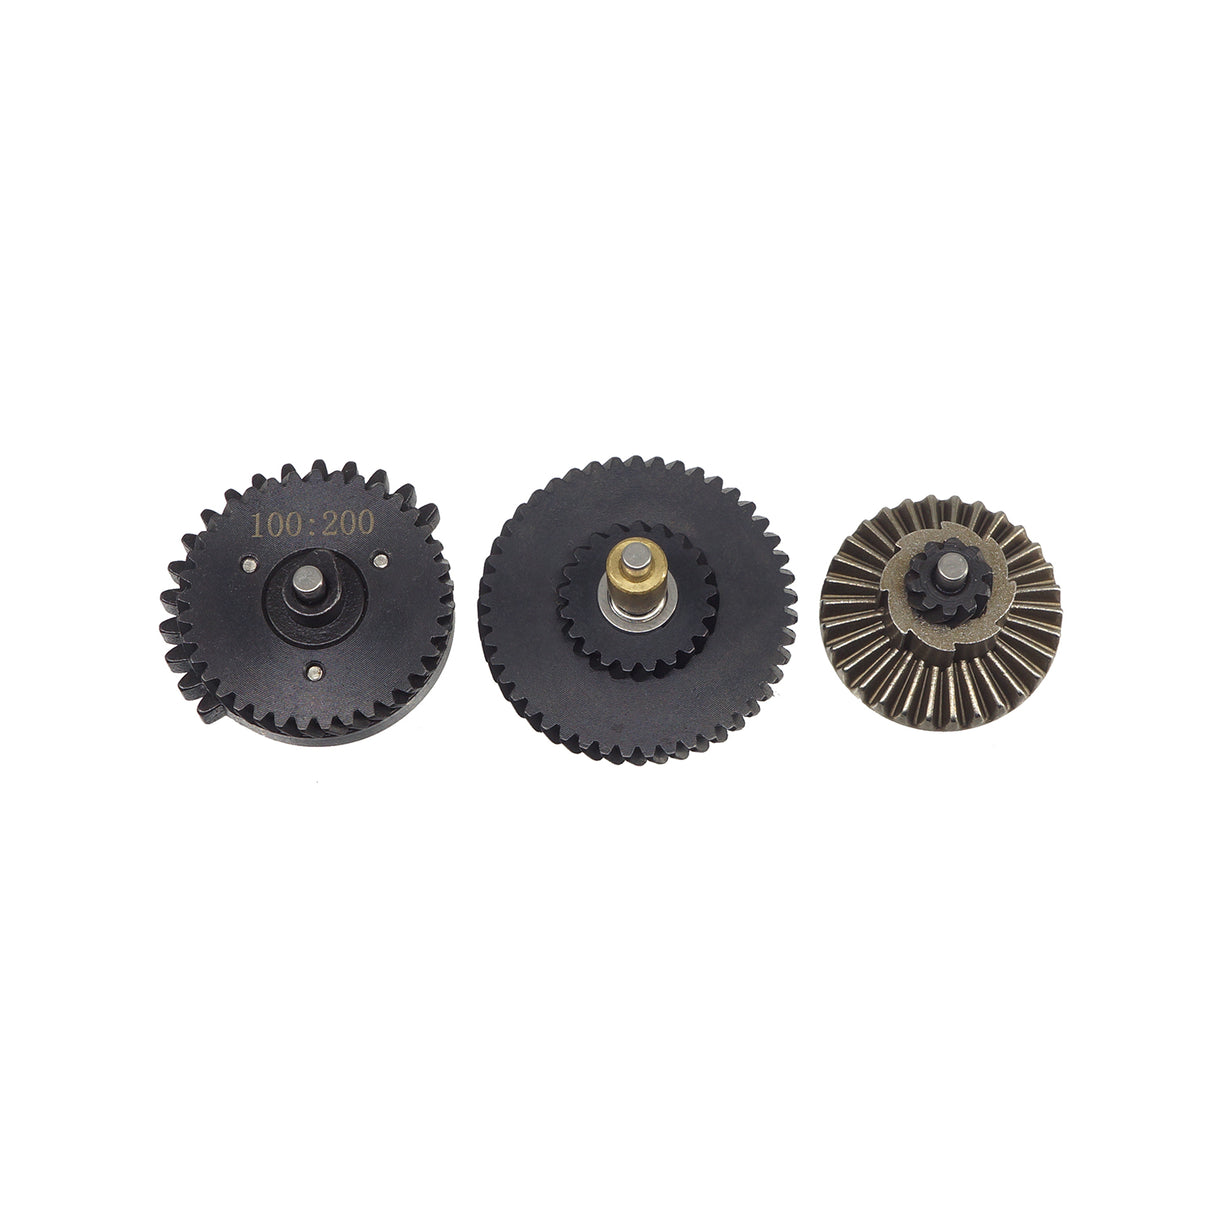 Army Force 100:200 3mm Steel CNC Bearing Gear Set for AEG Airsoft ( AF-IN0188 )